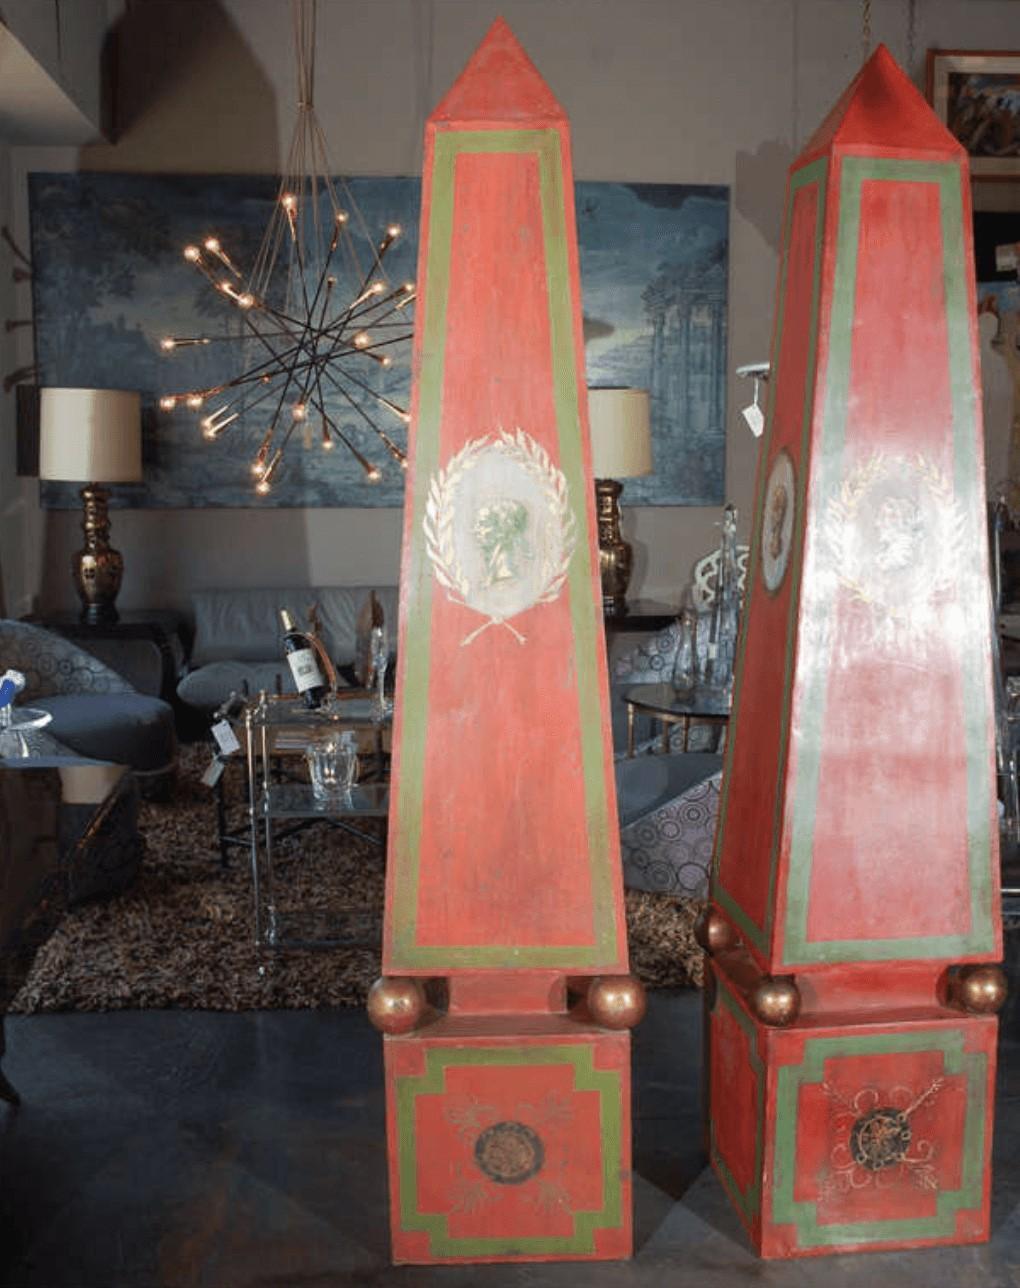 A large pair of vintage Italian tole obelisks in red, green and gold. Sides are decorated with a Roman head (each one different framed by laurel leaves). Front bases are painted with embelished crossed bars with an emblem. Gilded spheres on each